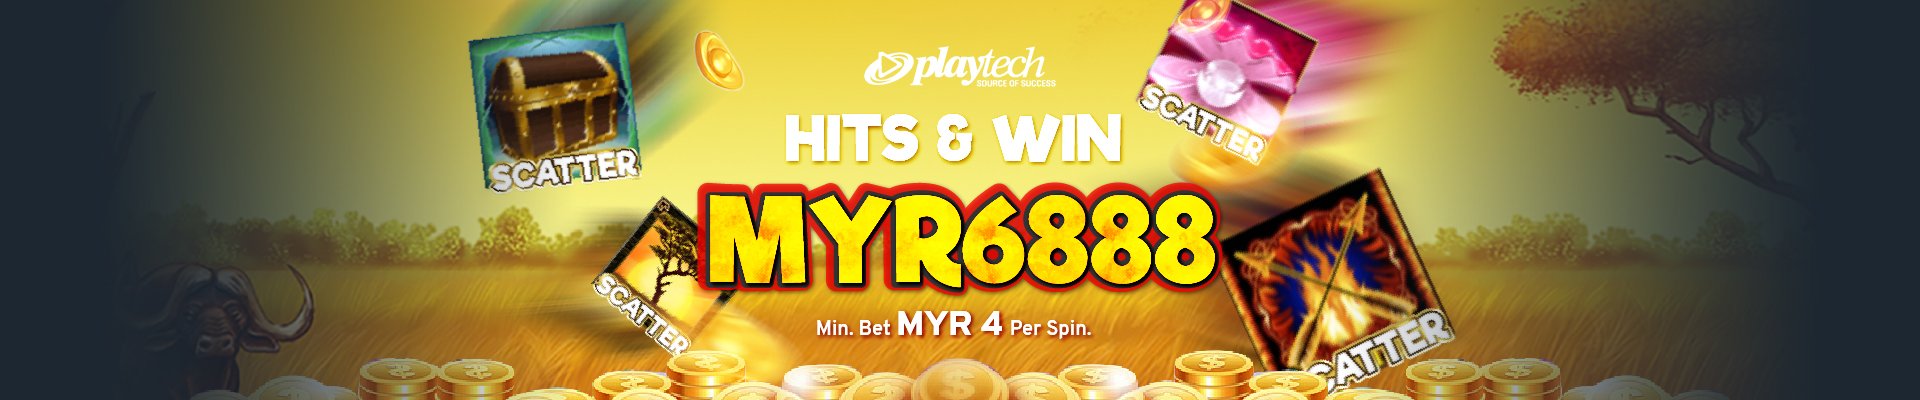 Hits & Win MYR6,888 Scatter Slots Malaysia 2021